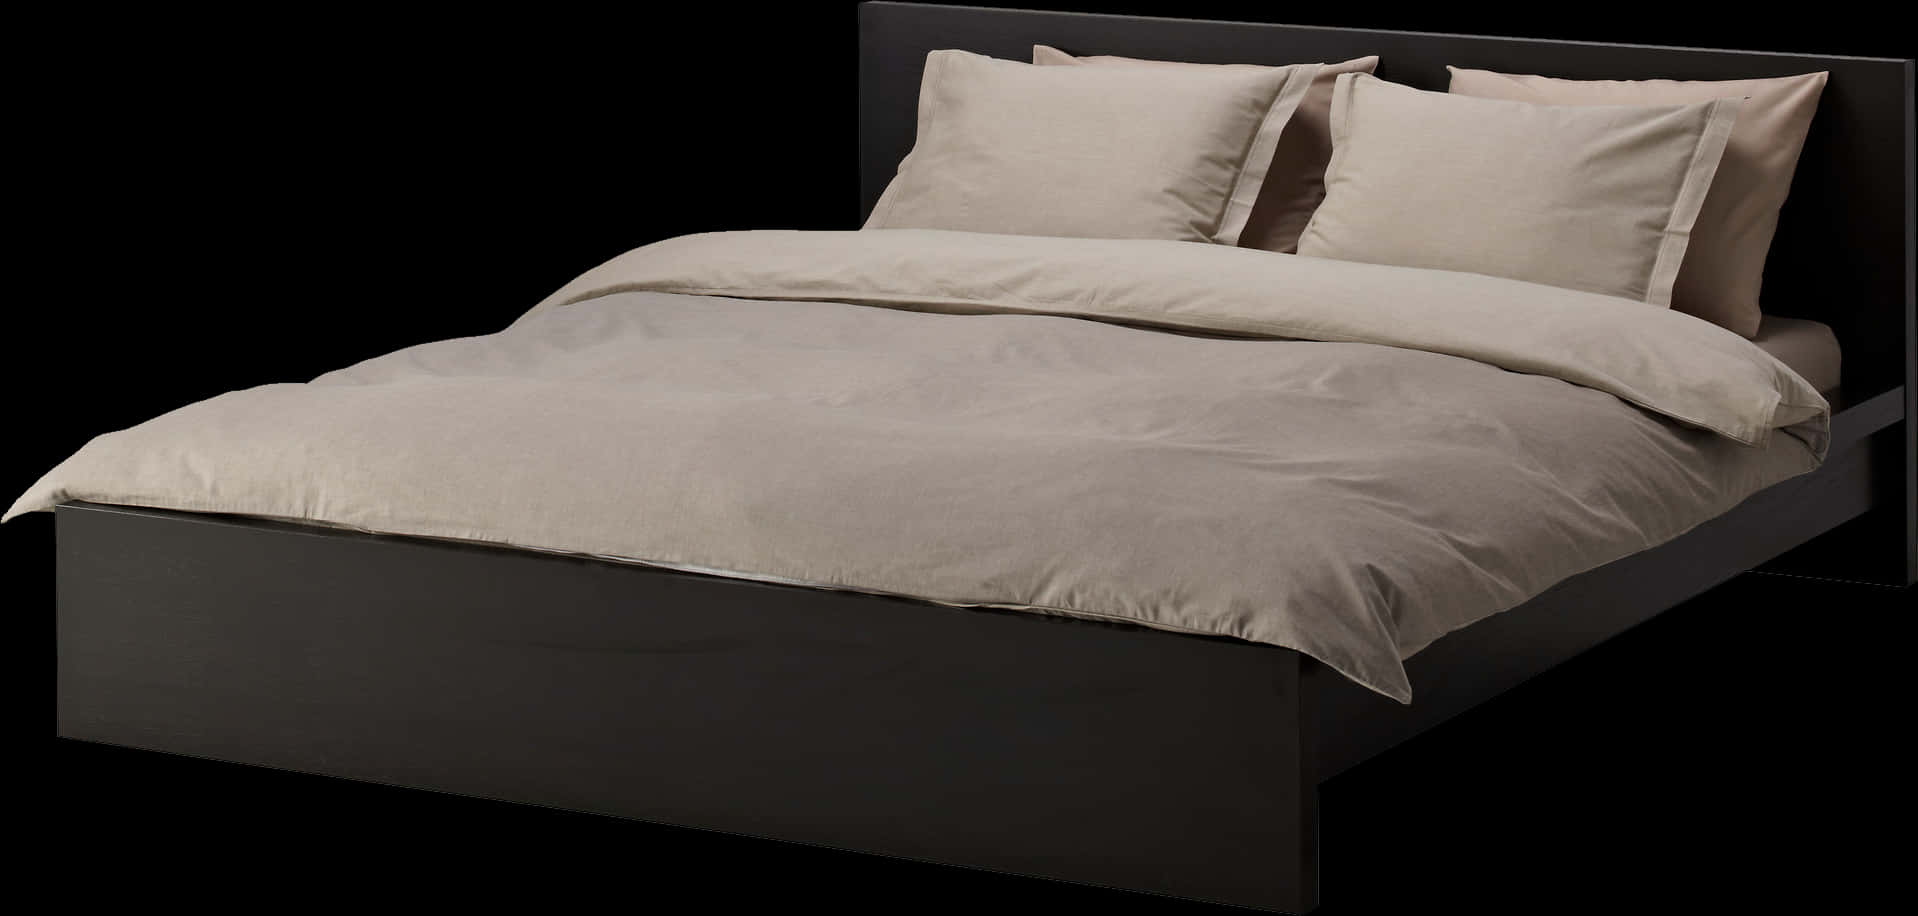 Modern Black Bedwith Neutral Bedding PNG